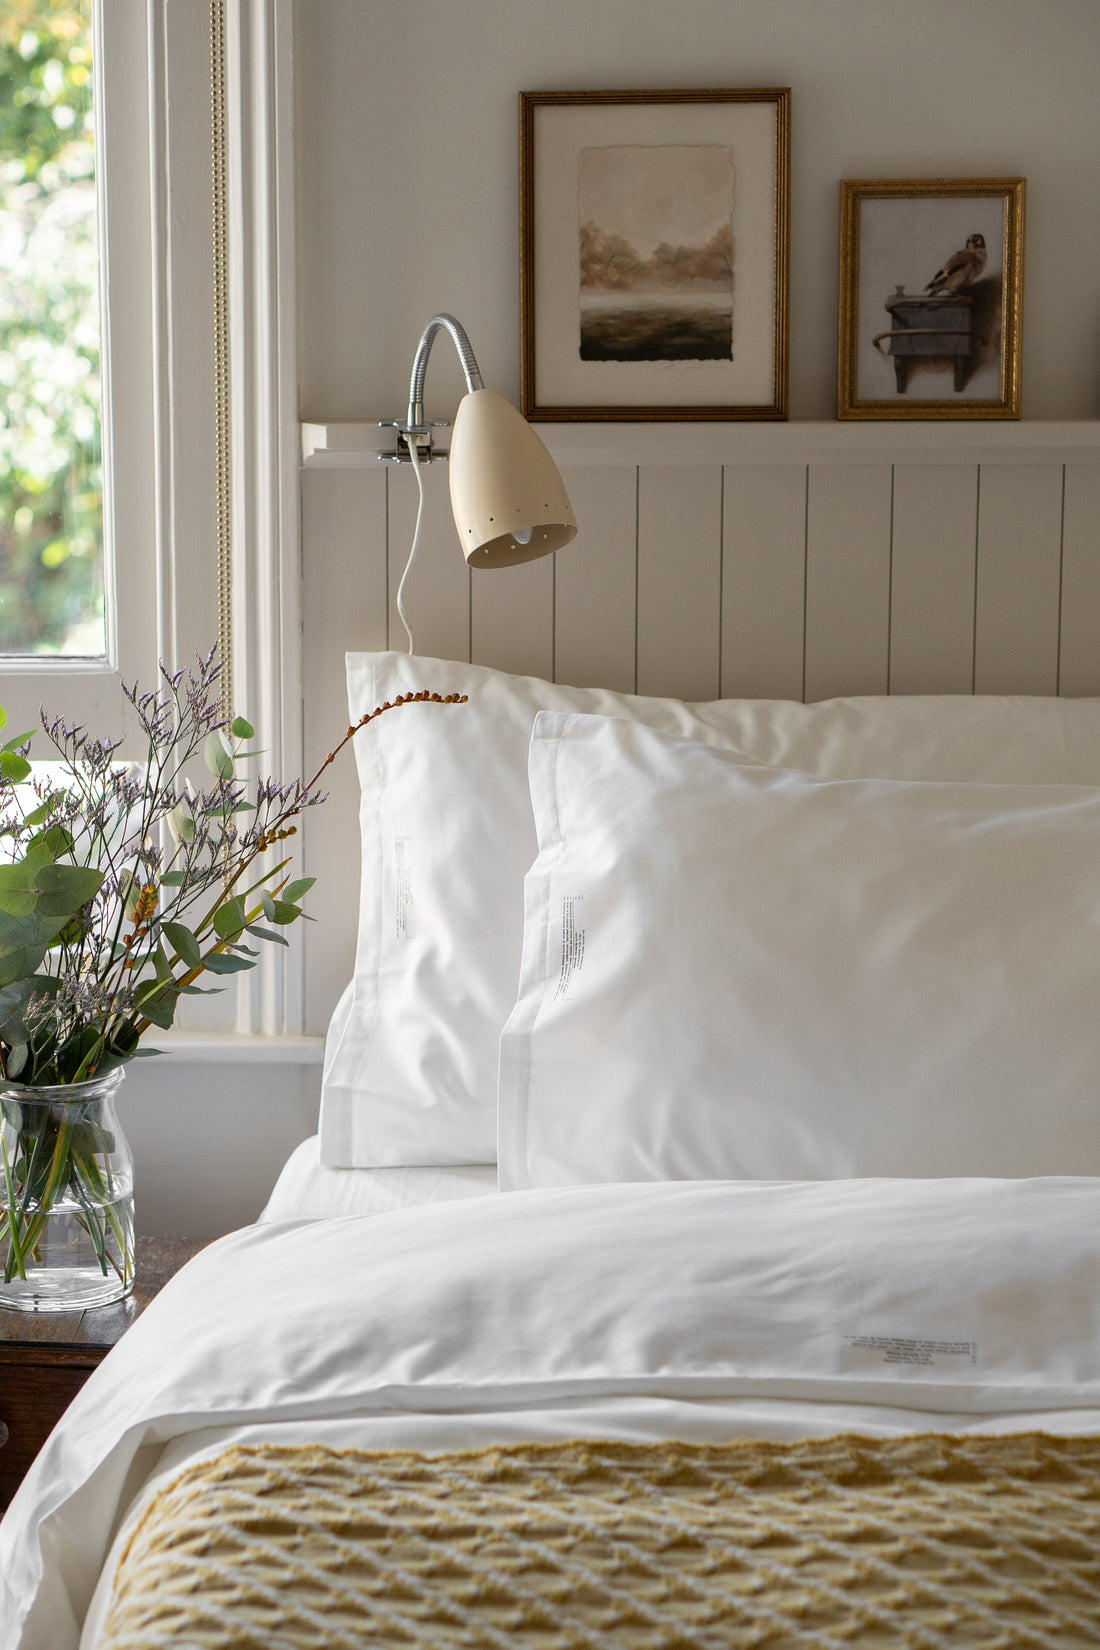 The Difference Between a Duvet and a Duvet Cover